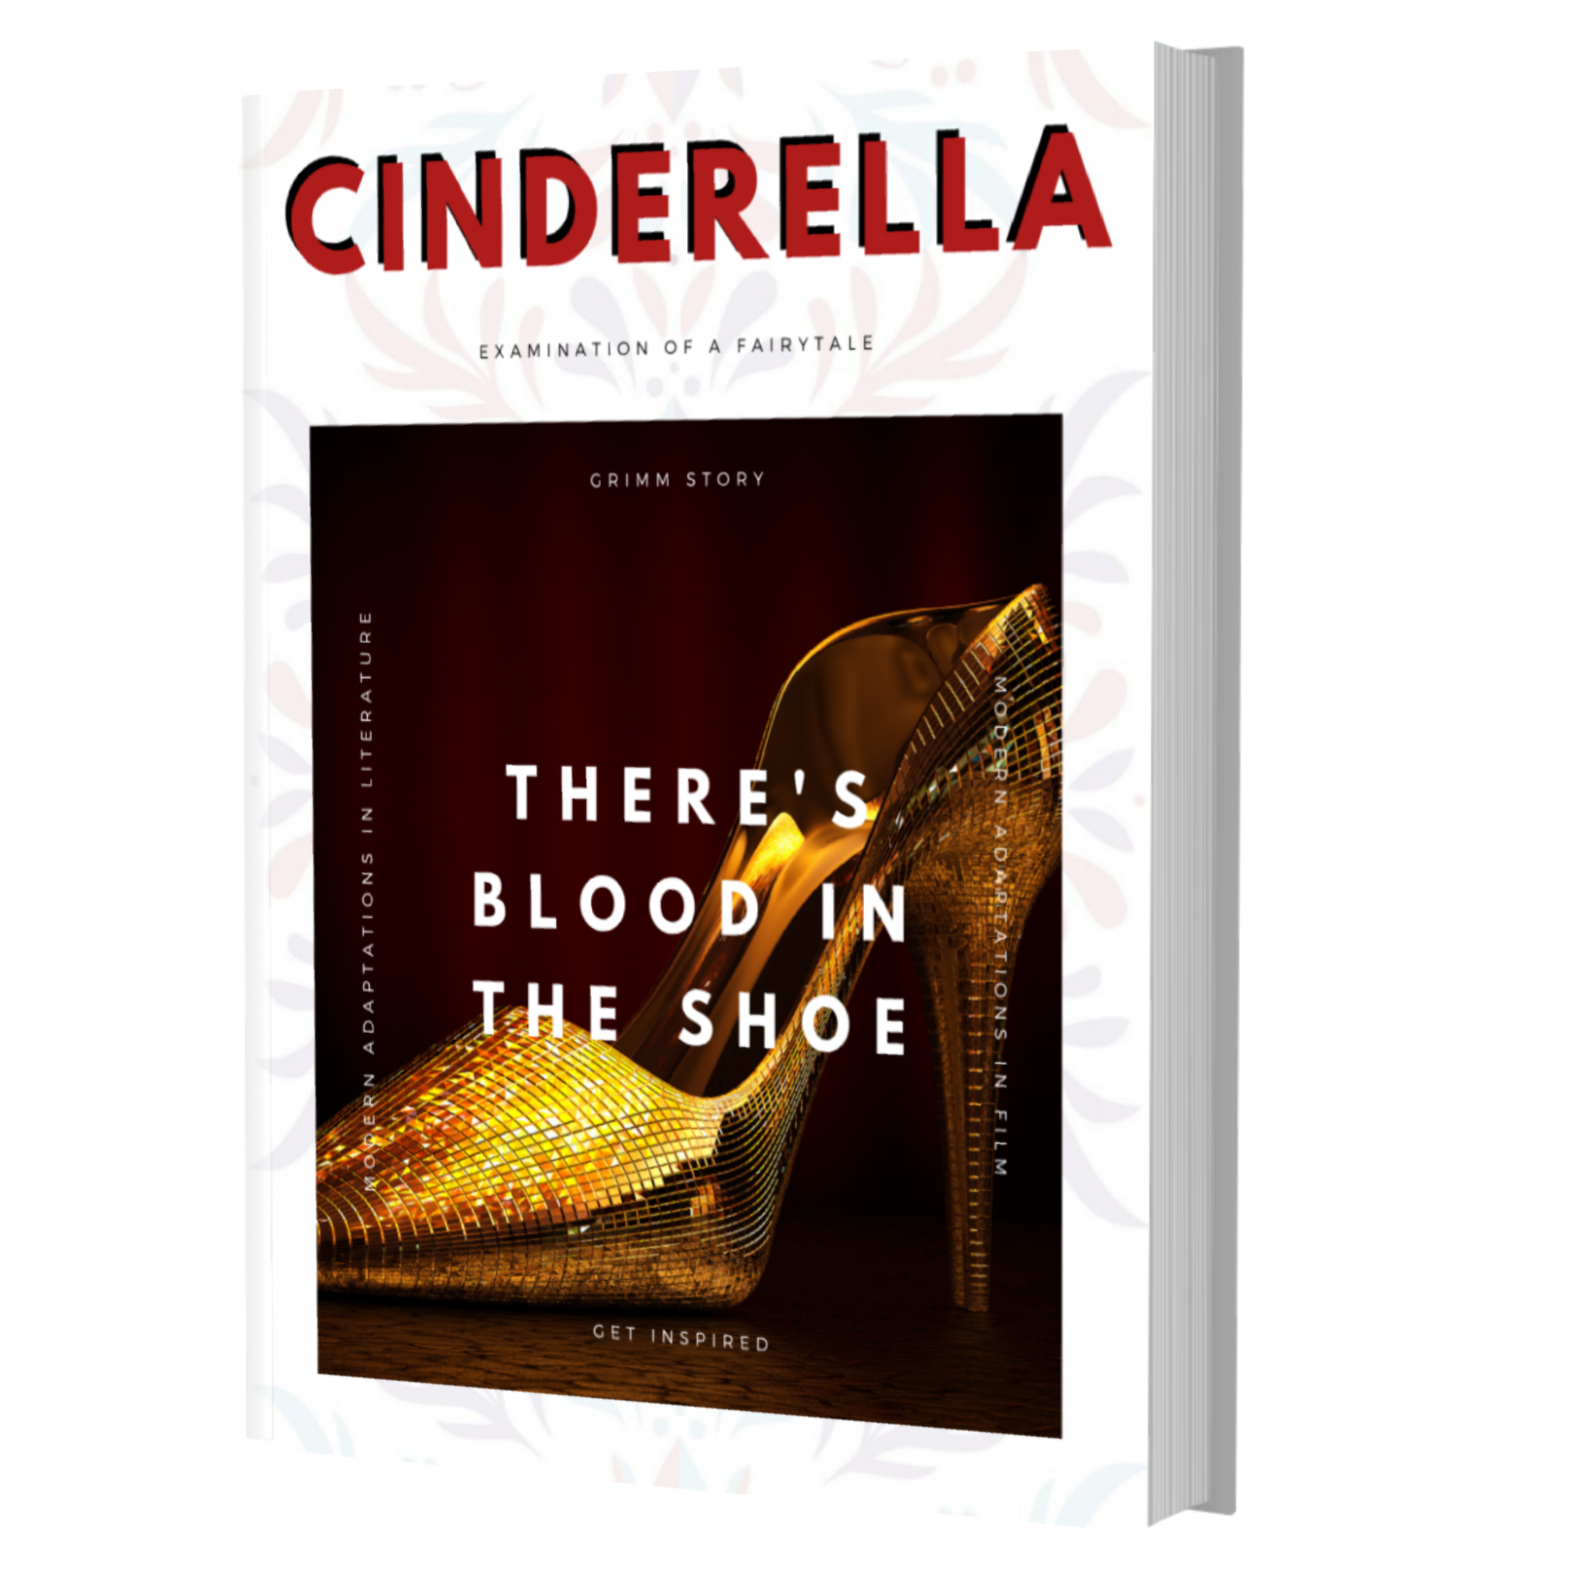 A mock book cover for the Cinderella examinations of a fairytale ebook